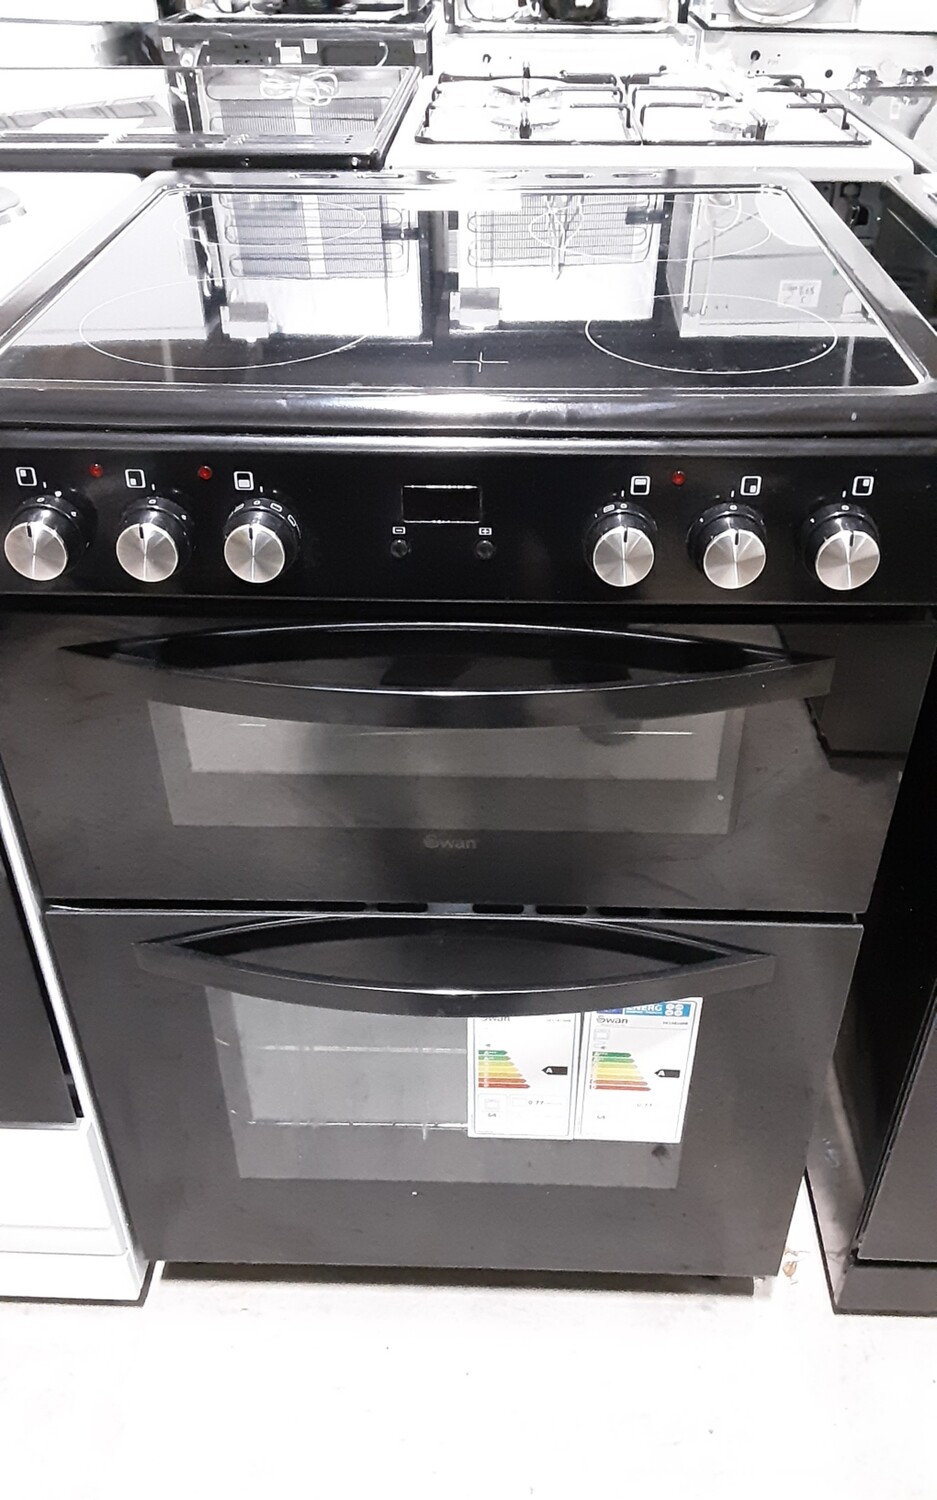 Swan SX158100B 60cm Electric Cooker conventional oven with Ceramic Hob - Black - Refurbished 6 Month Guarantee 